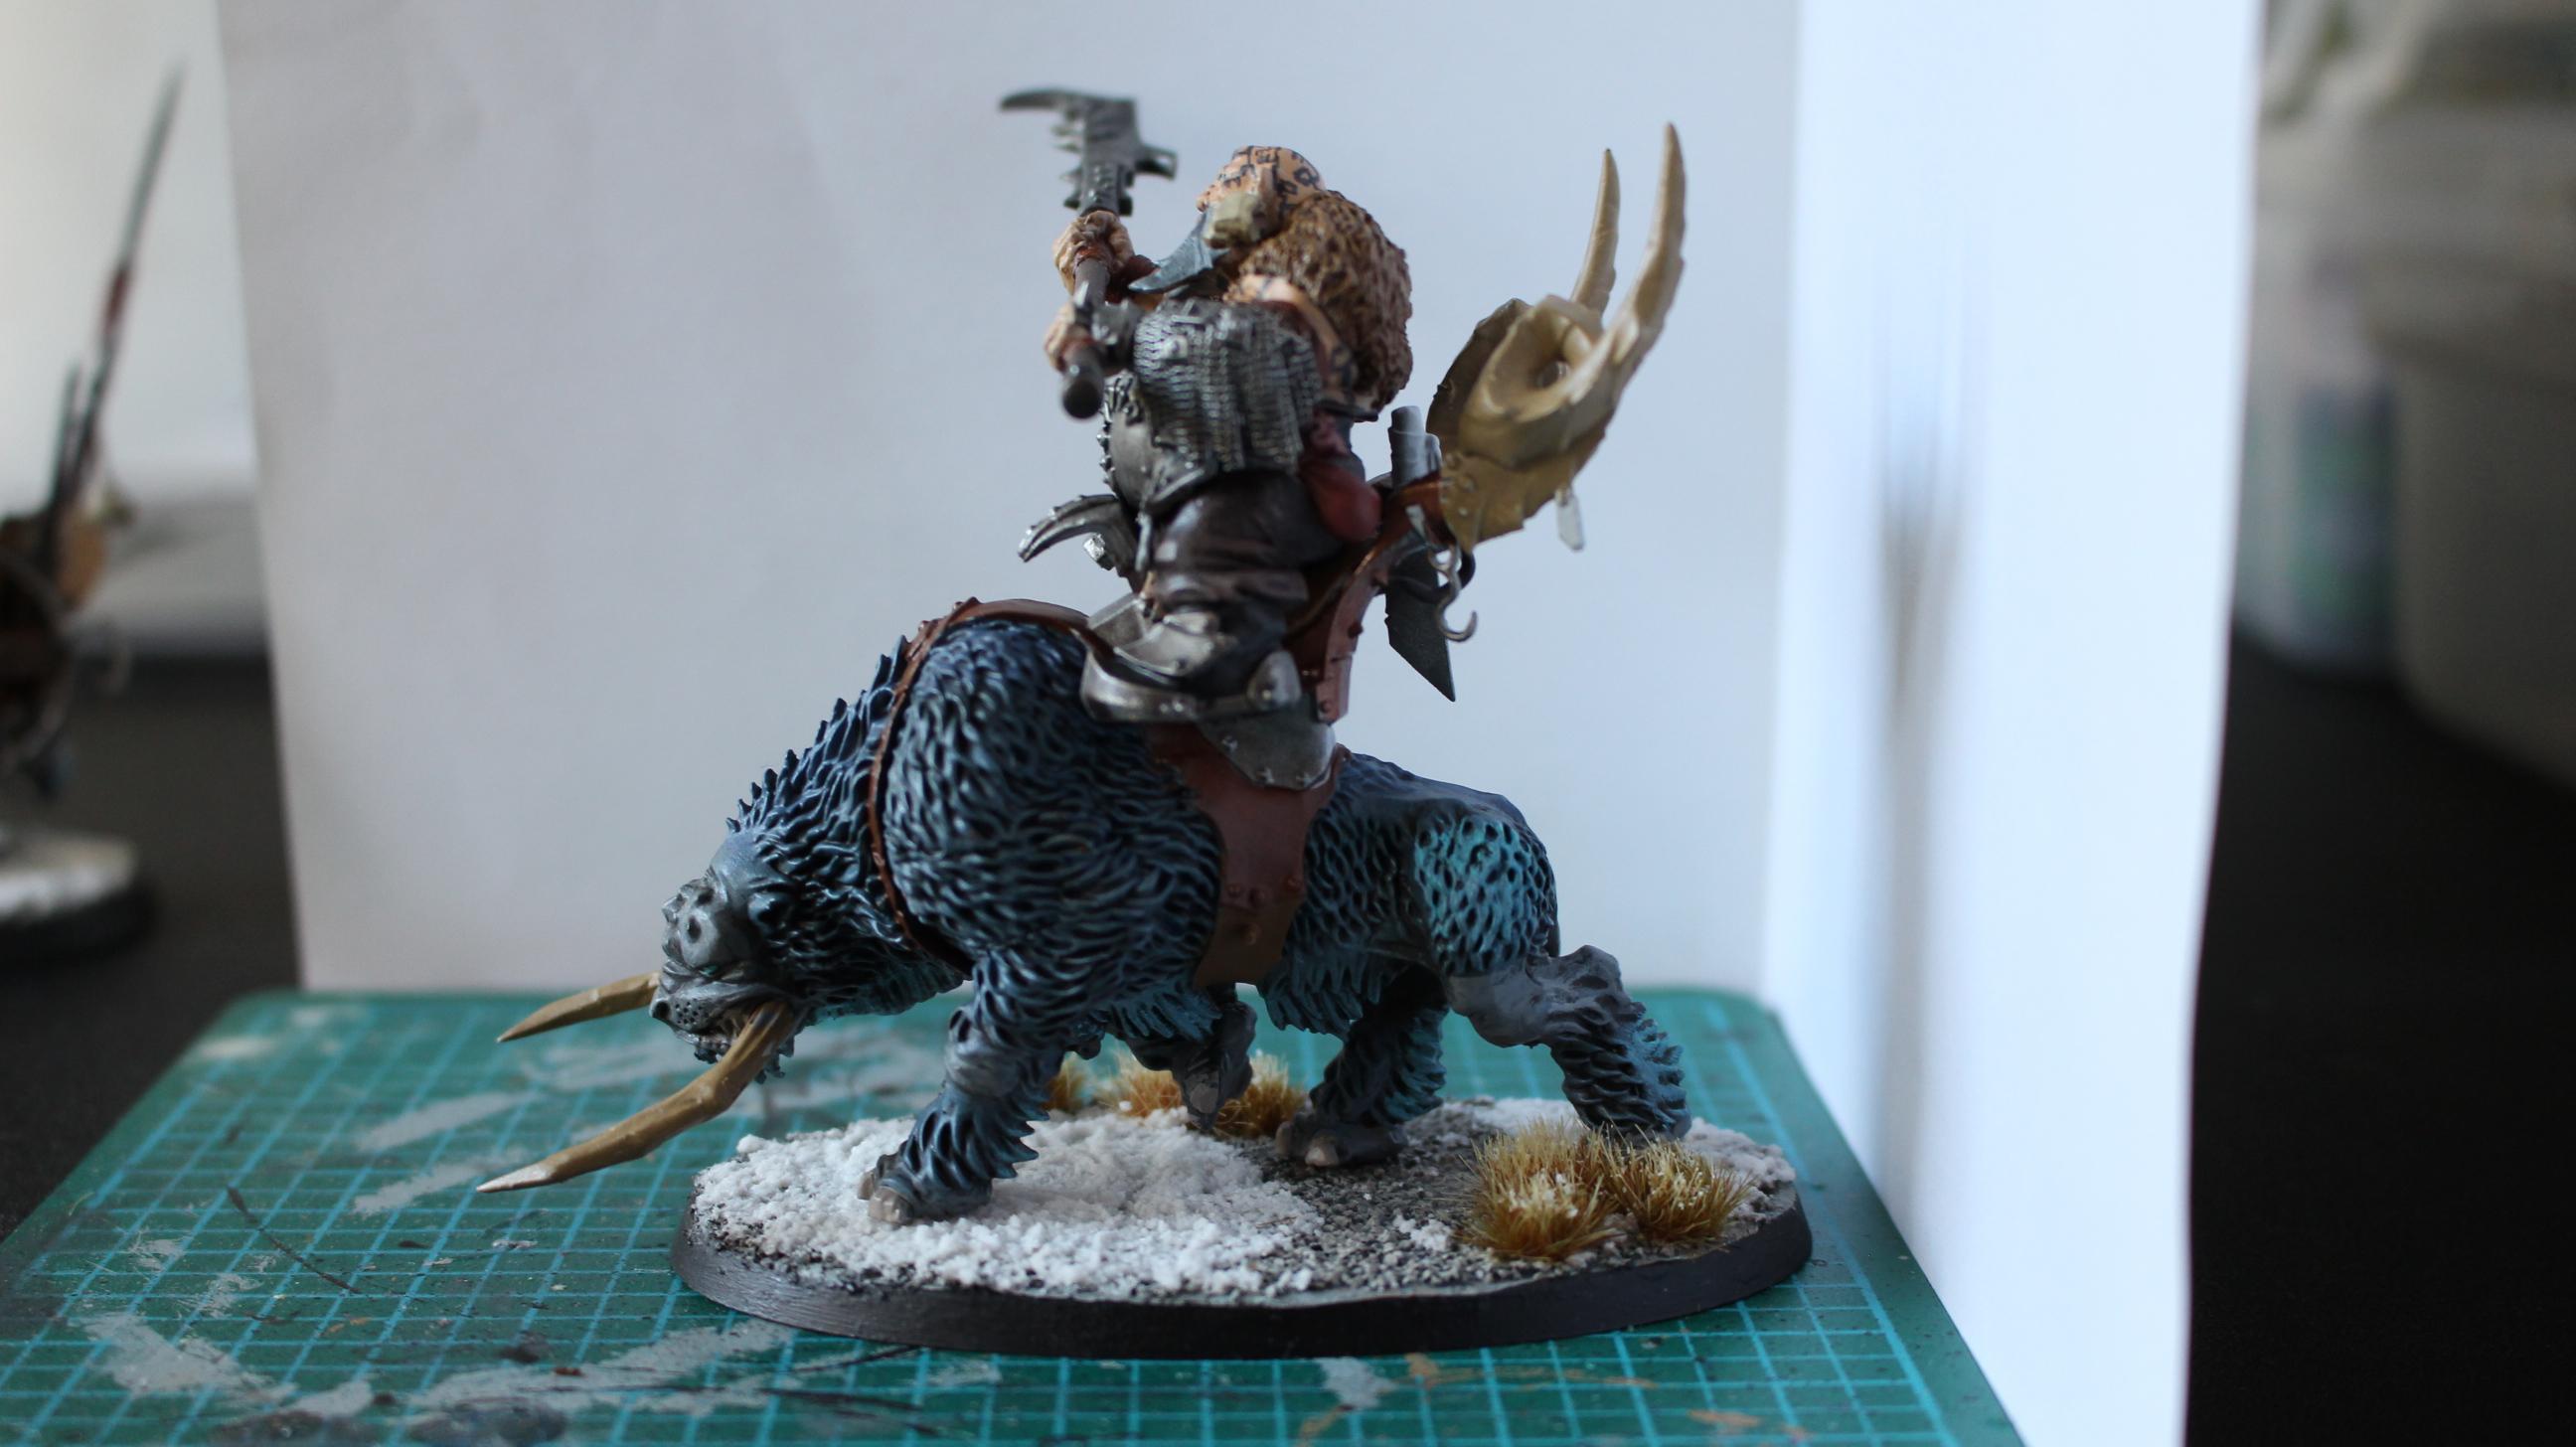 The Fur is finished, just need to add washes and highlights to the saddle and straps